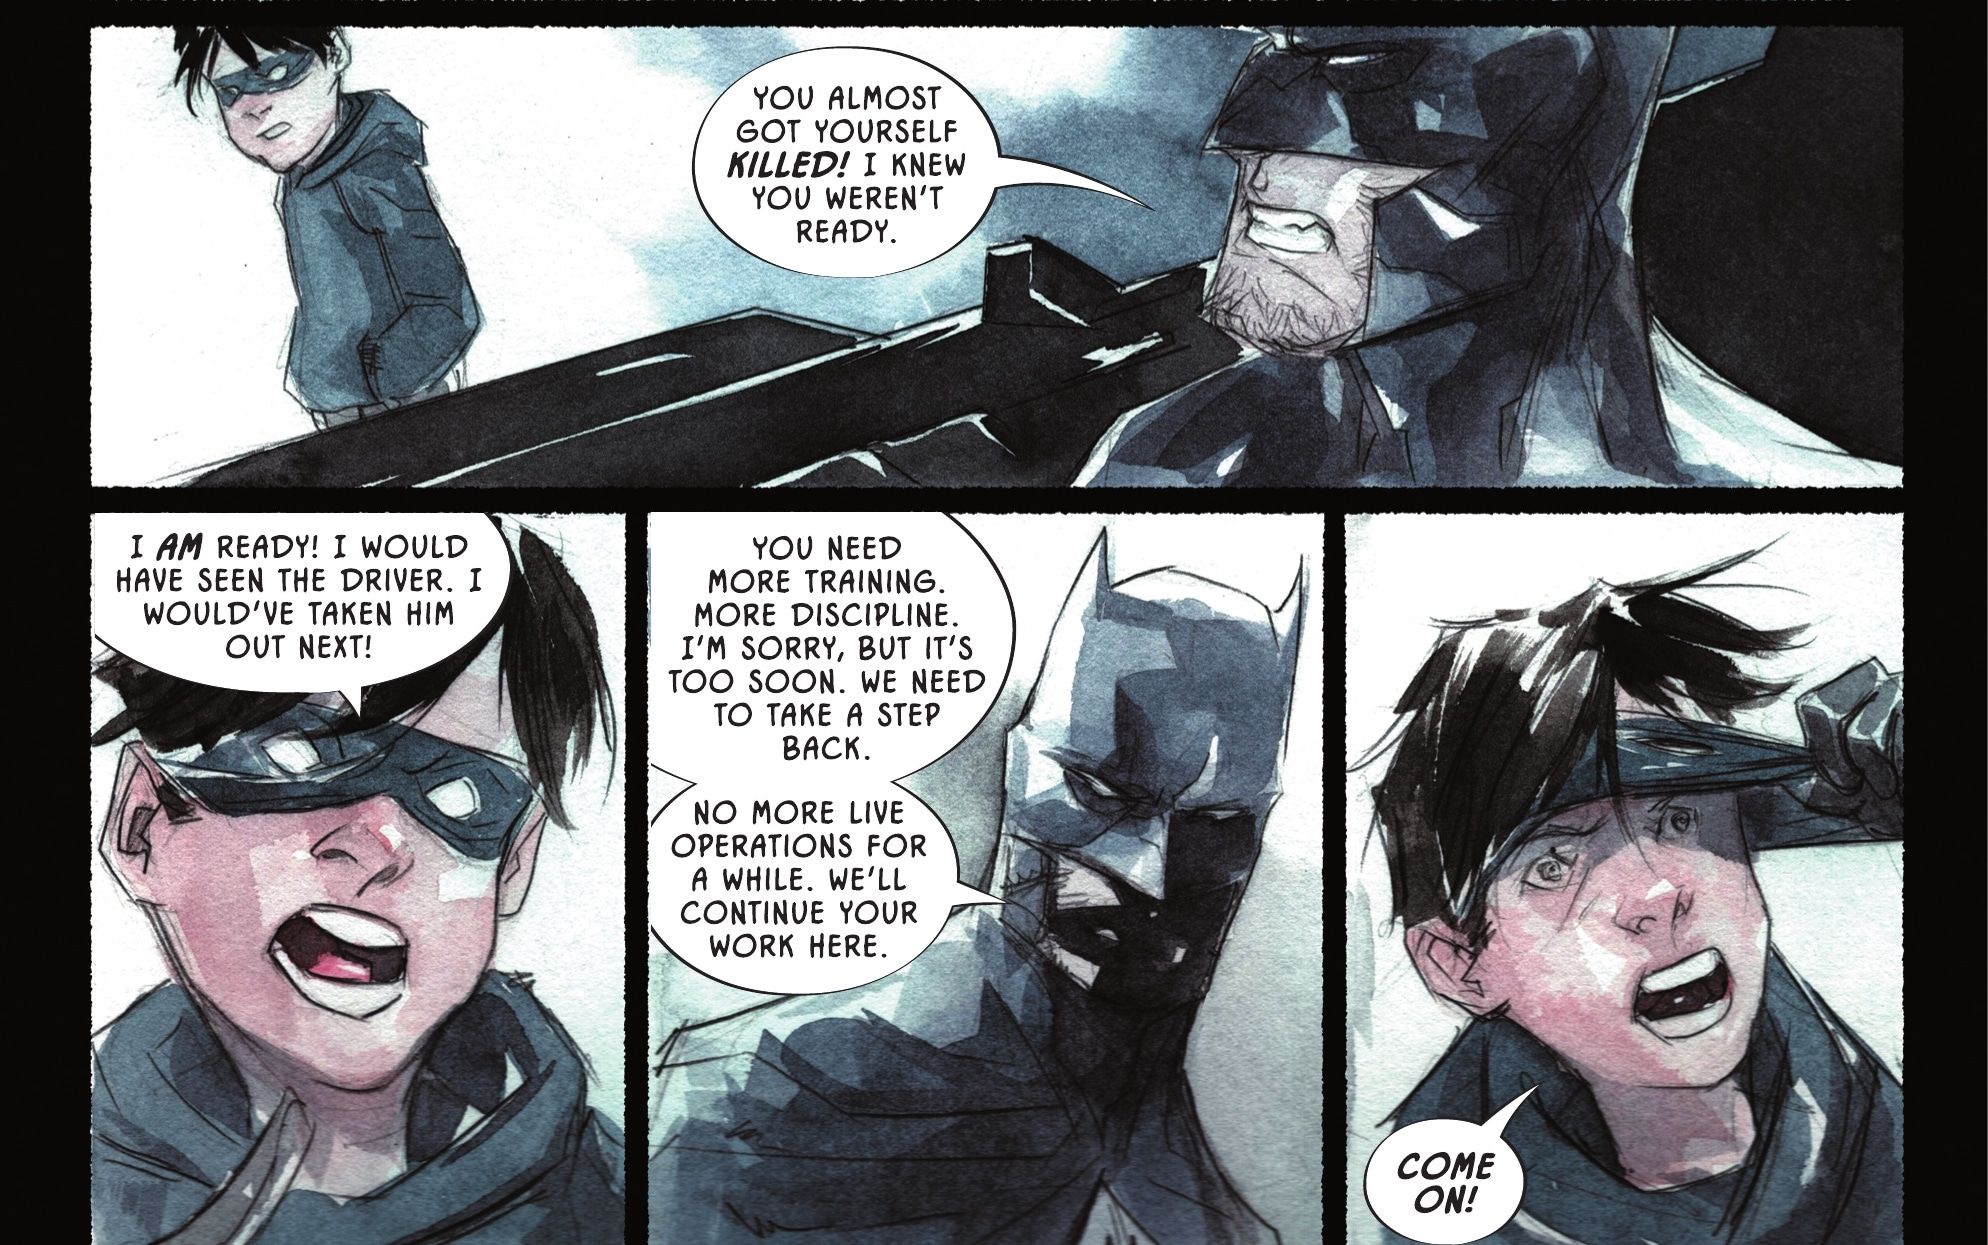 Dick and Bruce argue in Robin's early days